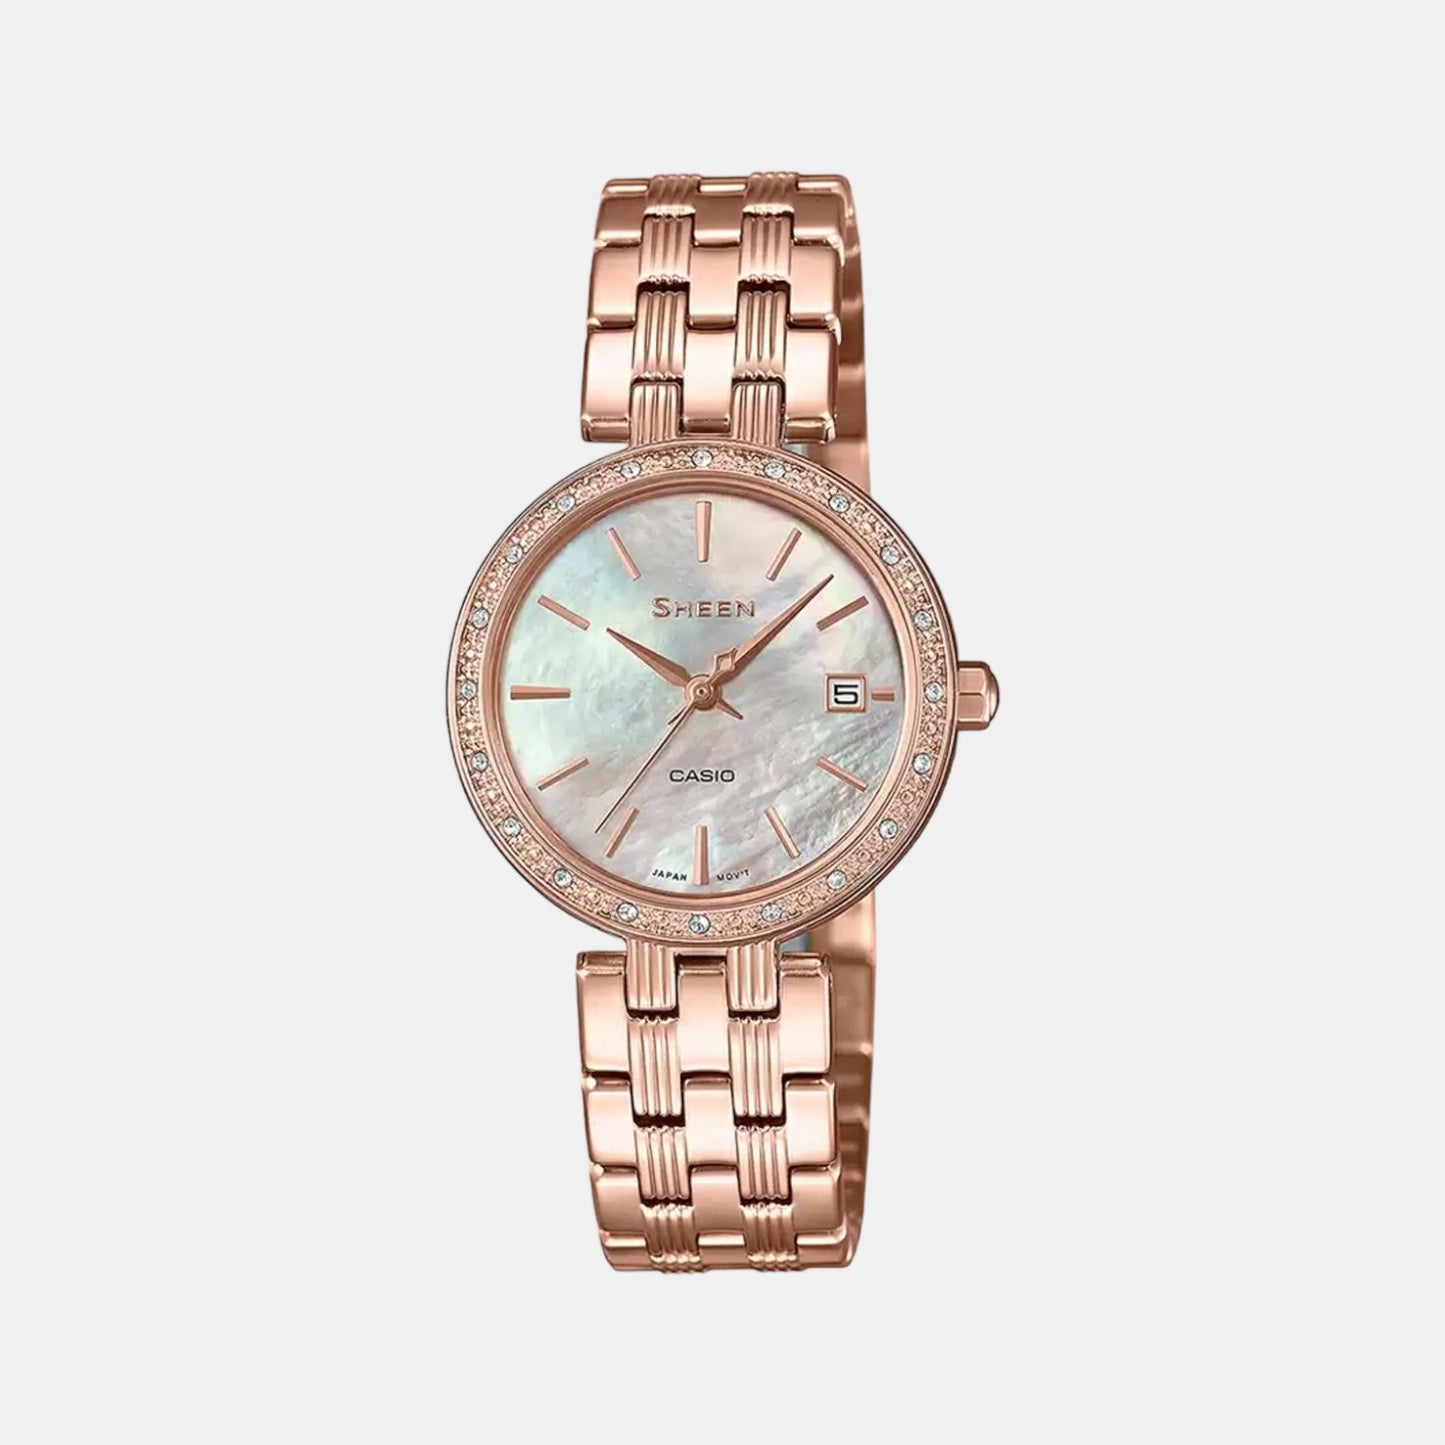 casio-stainless-steel-rose-gold-analog-womens-watch-watch-sh225